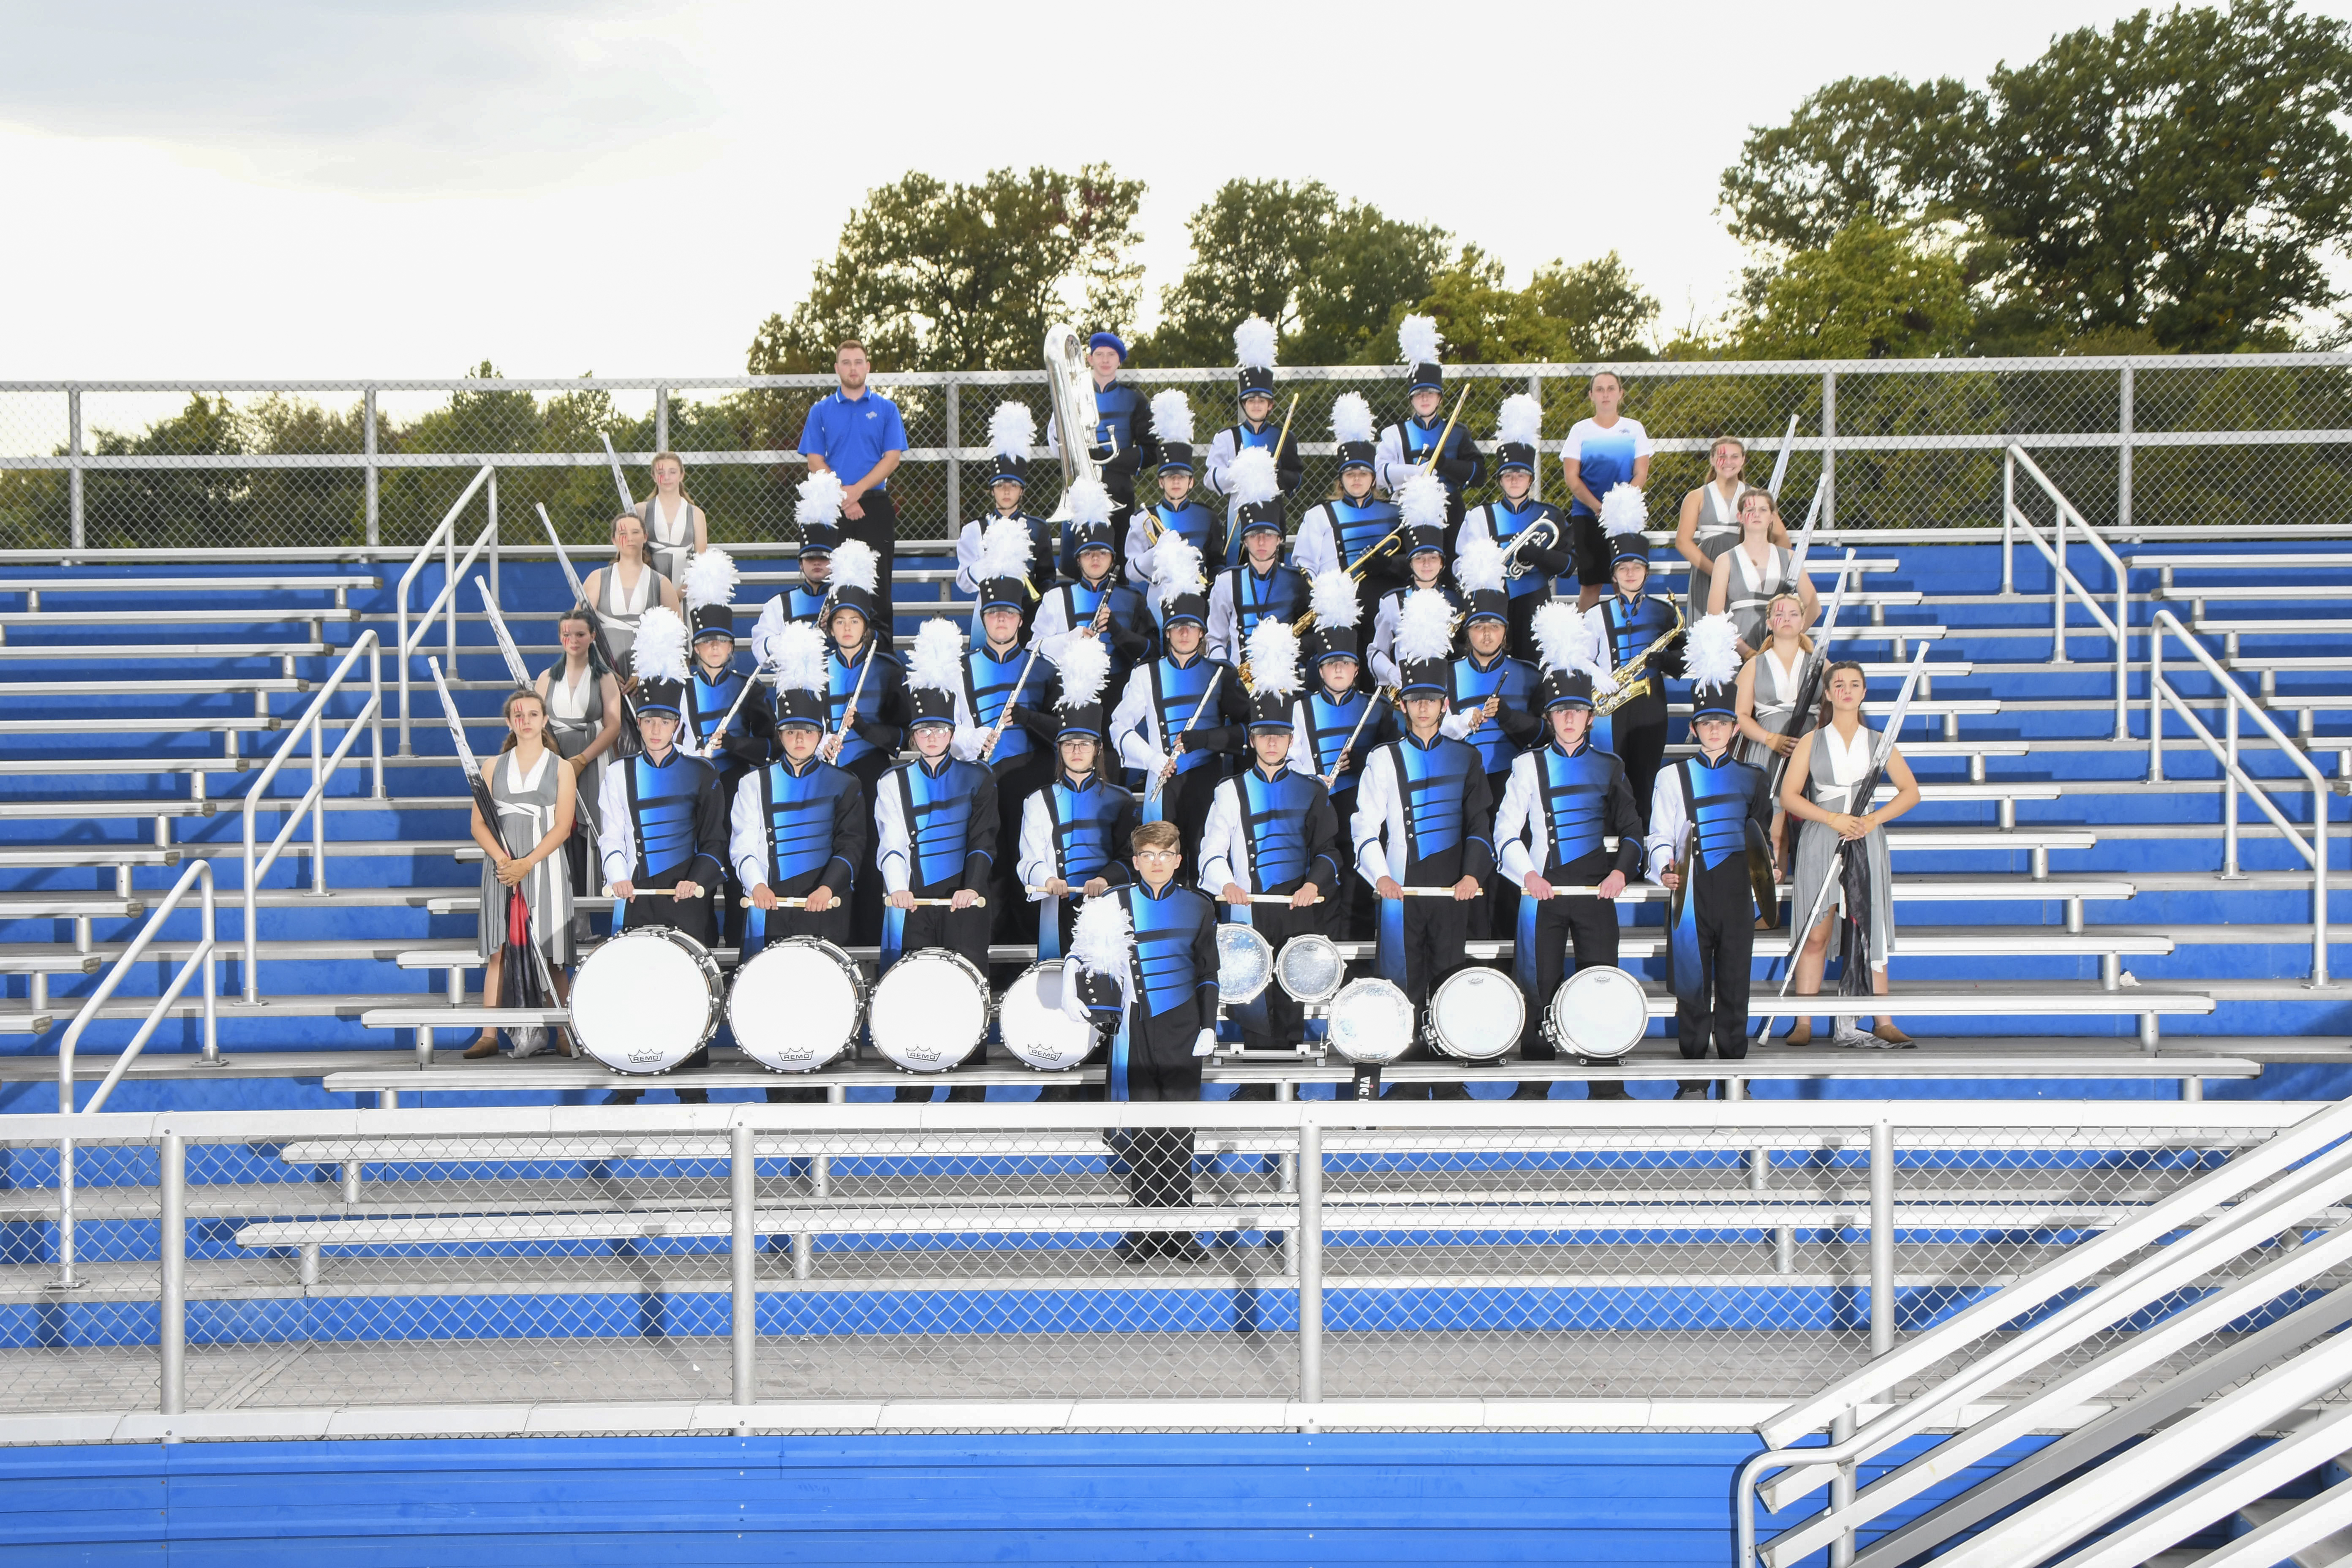 2022 - 2023 Marching Band Team